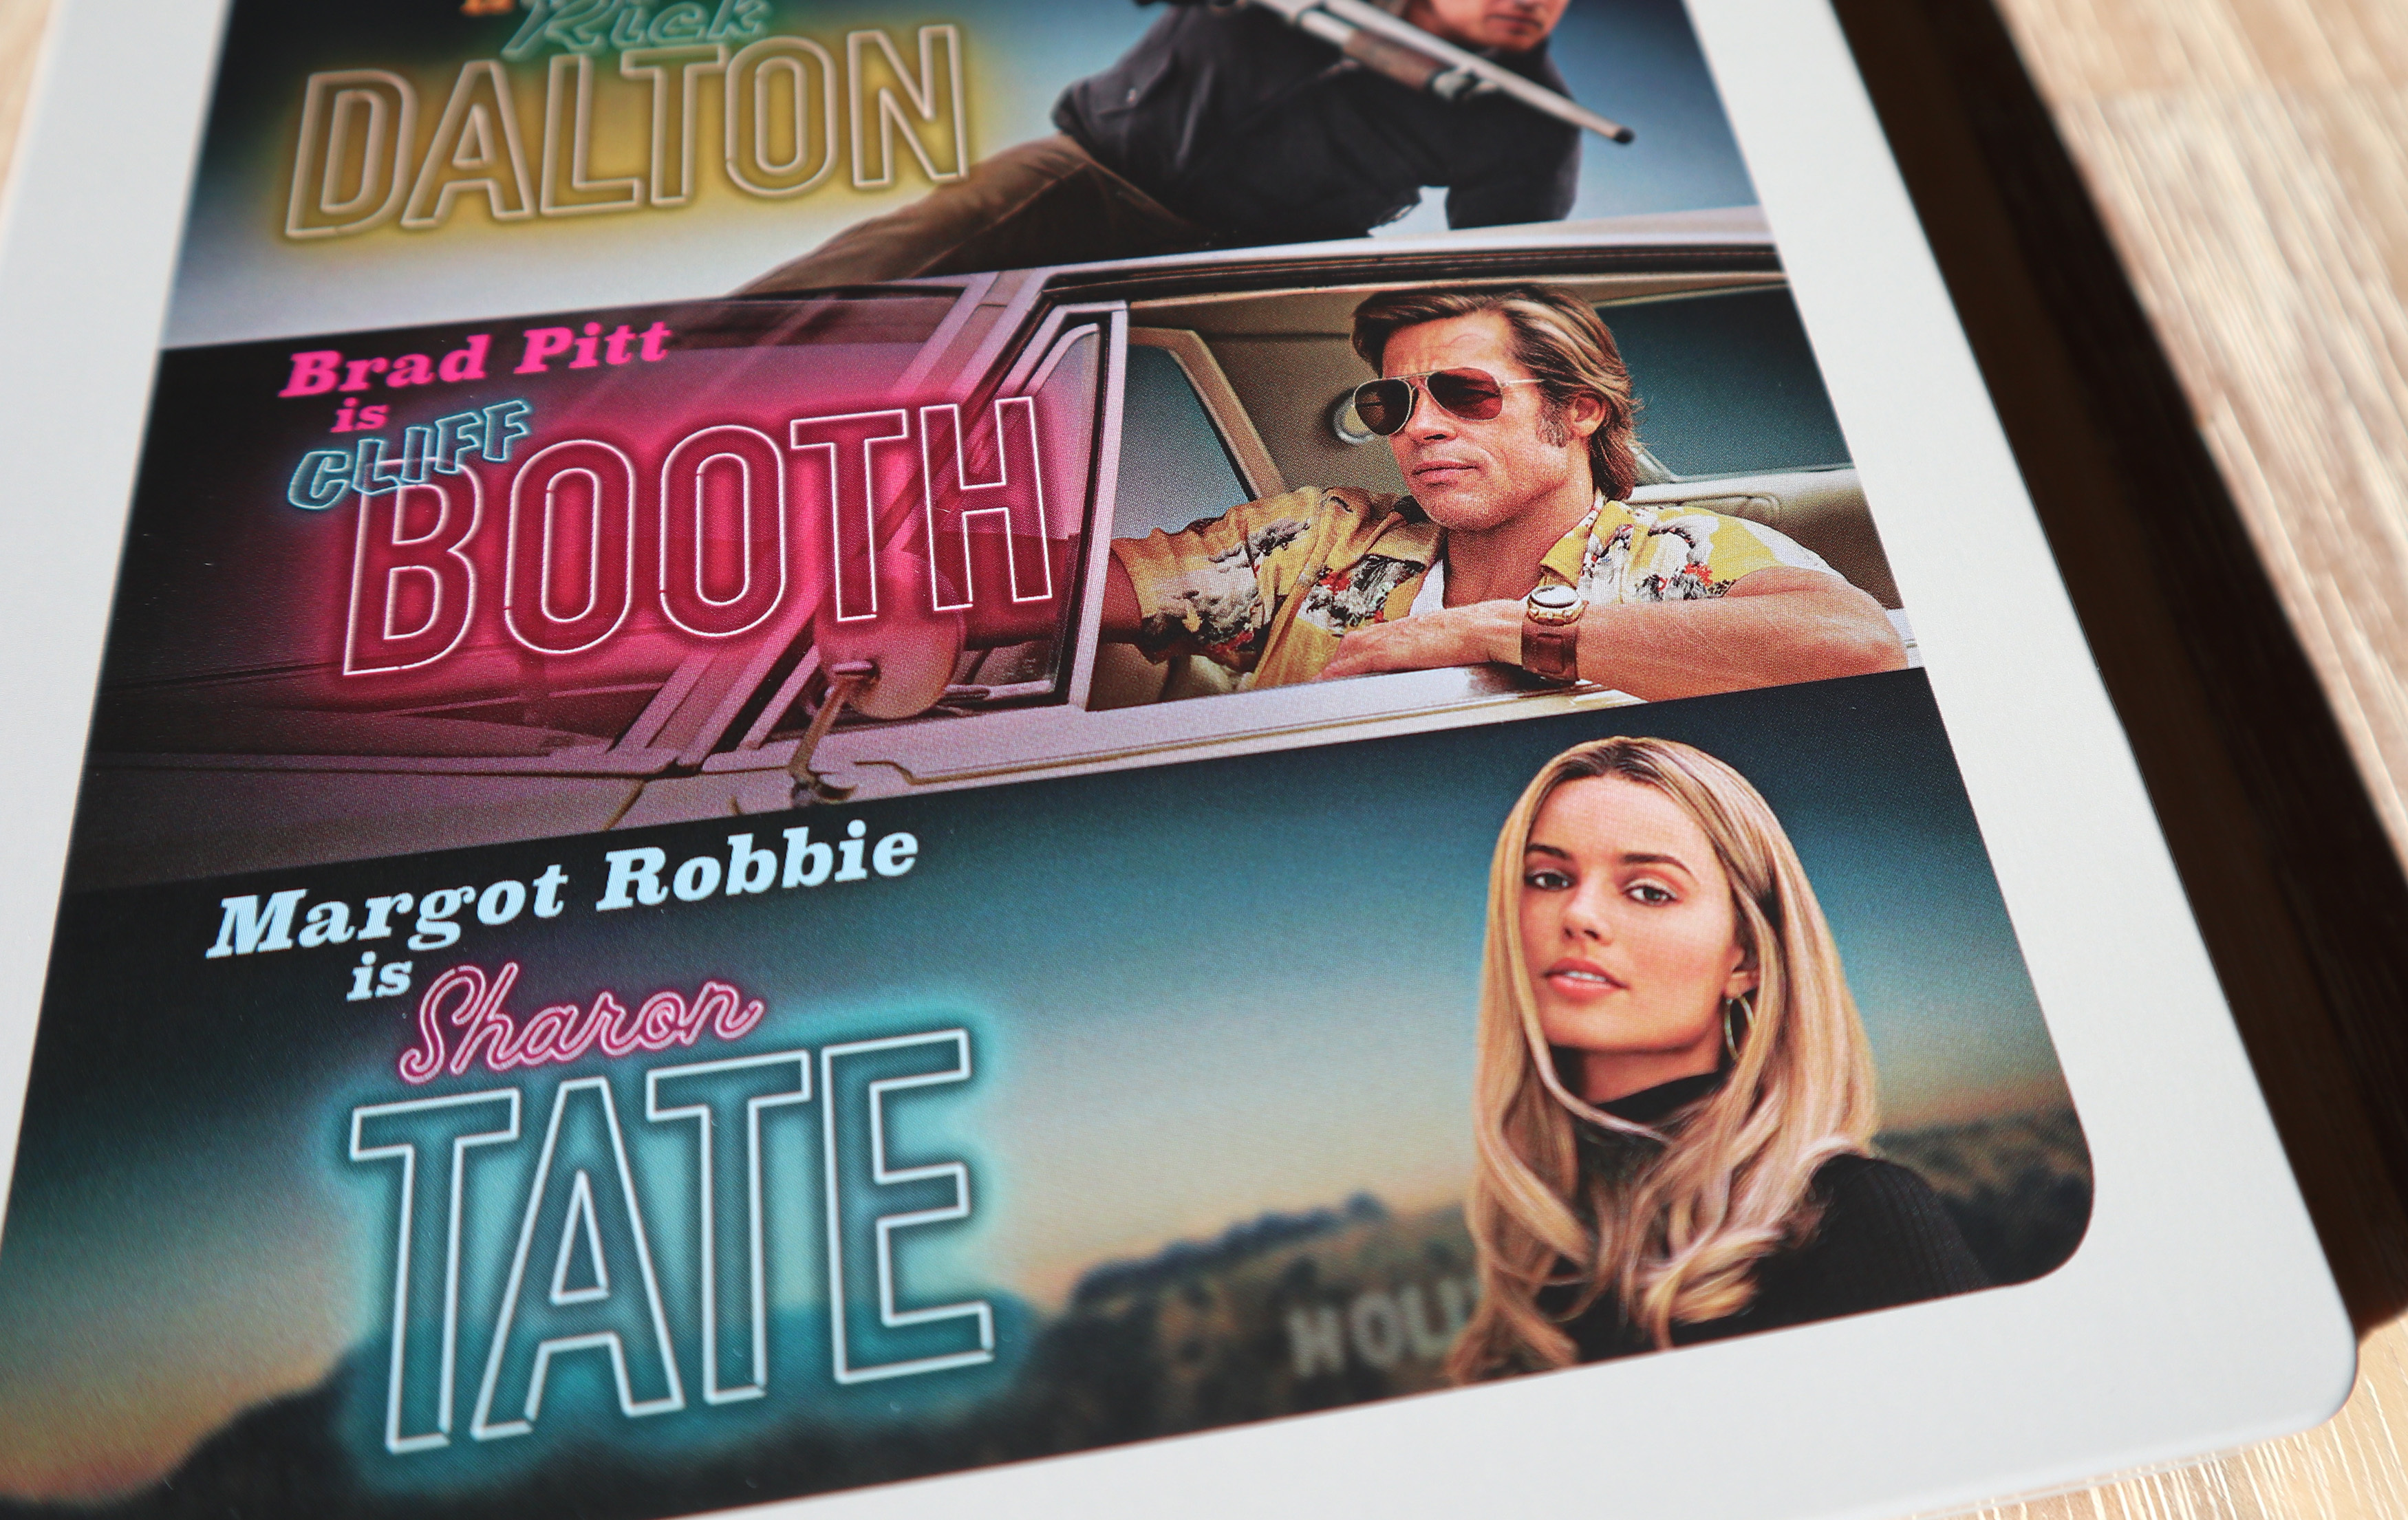 Once Upon a Time in Hollywood 4K Ultra Amazon.co.jp steelbook ワンス・アポン・ア・タイム・イン・ハリウッド スチールブック